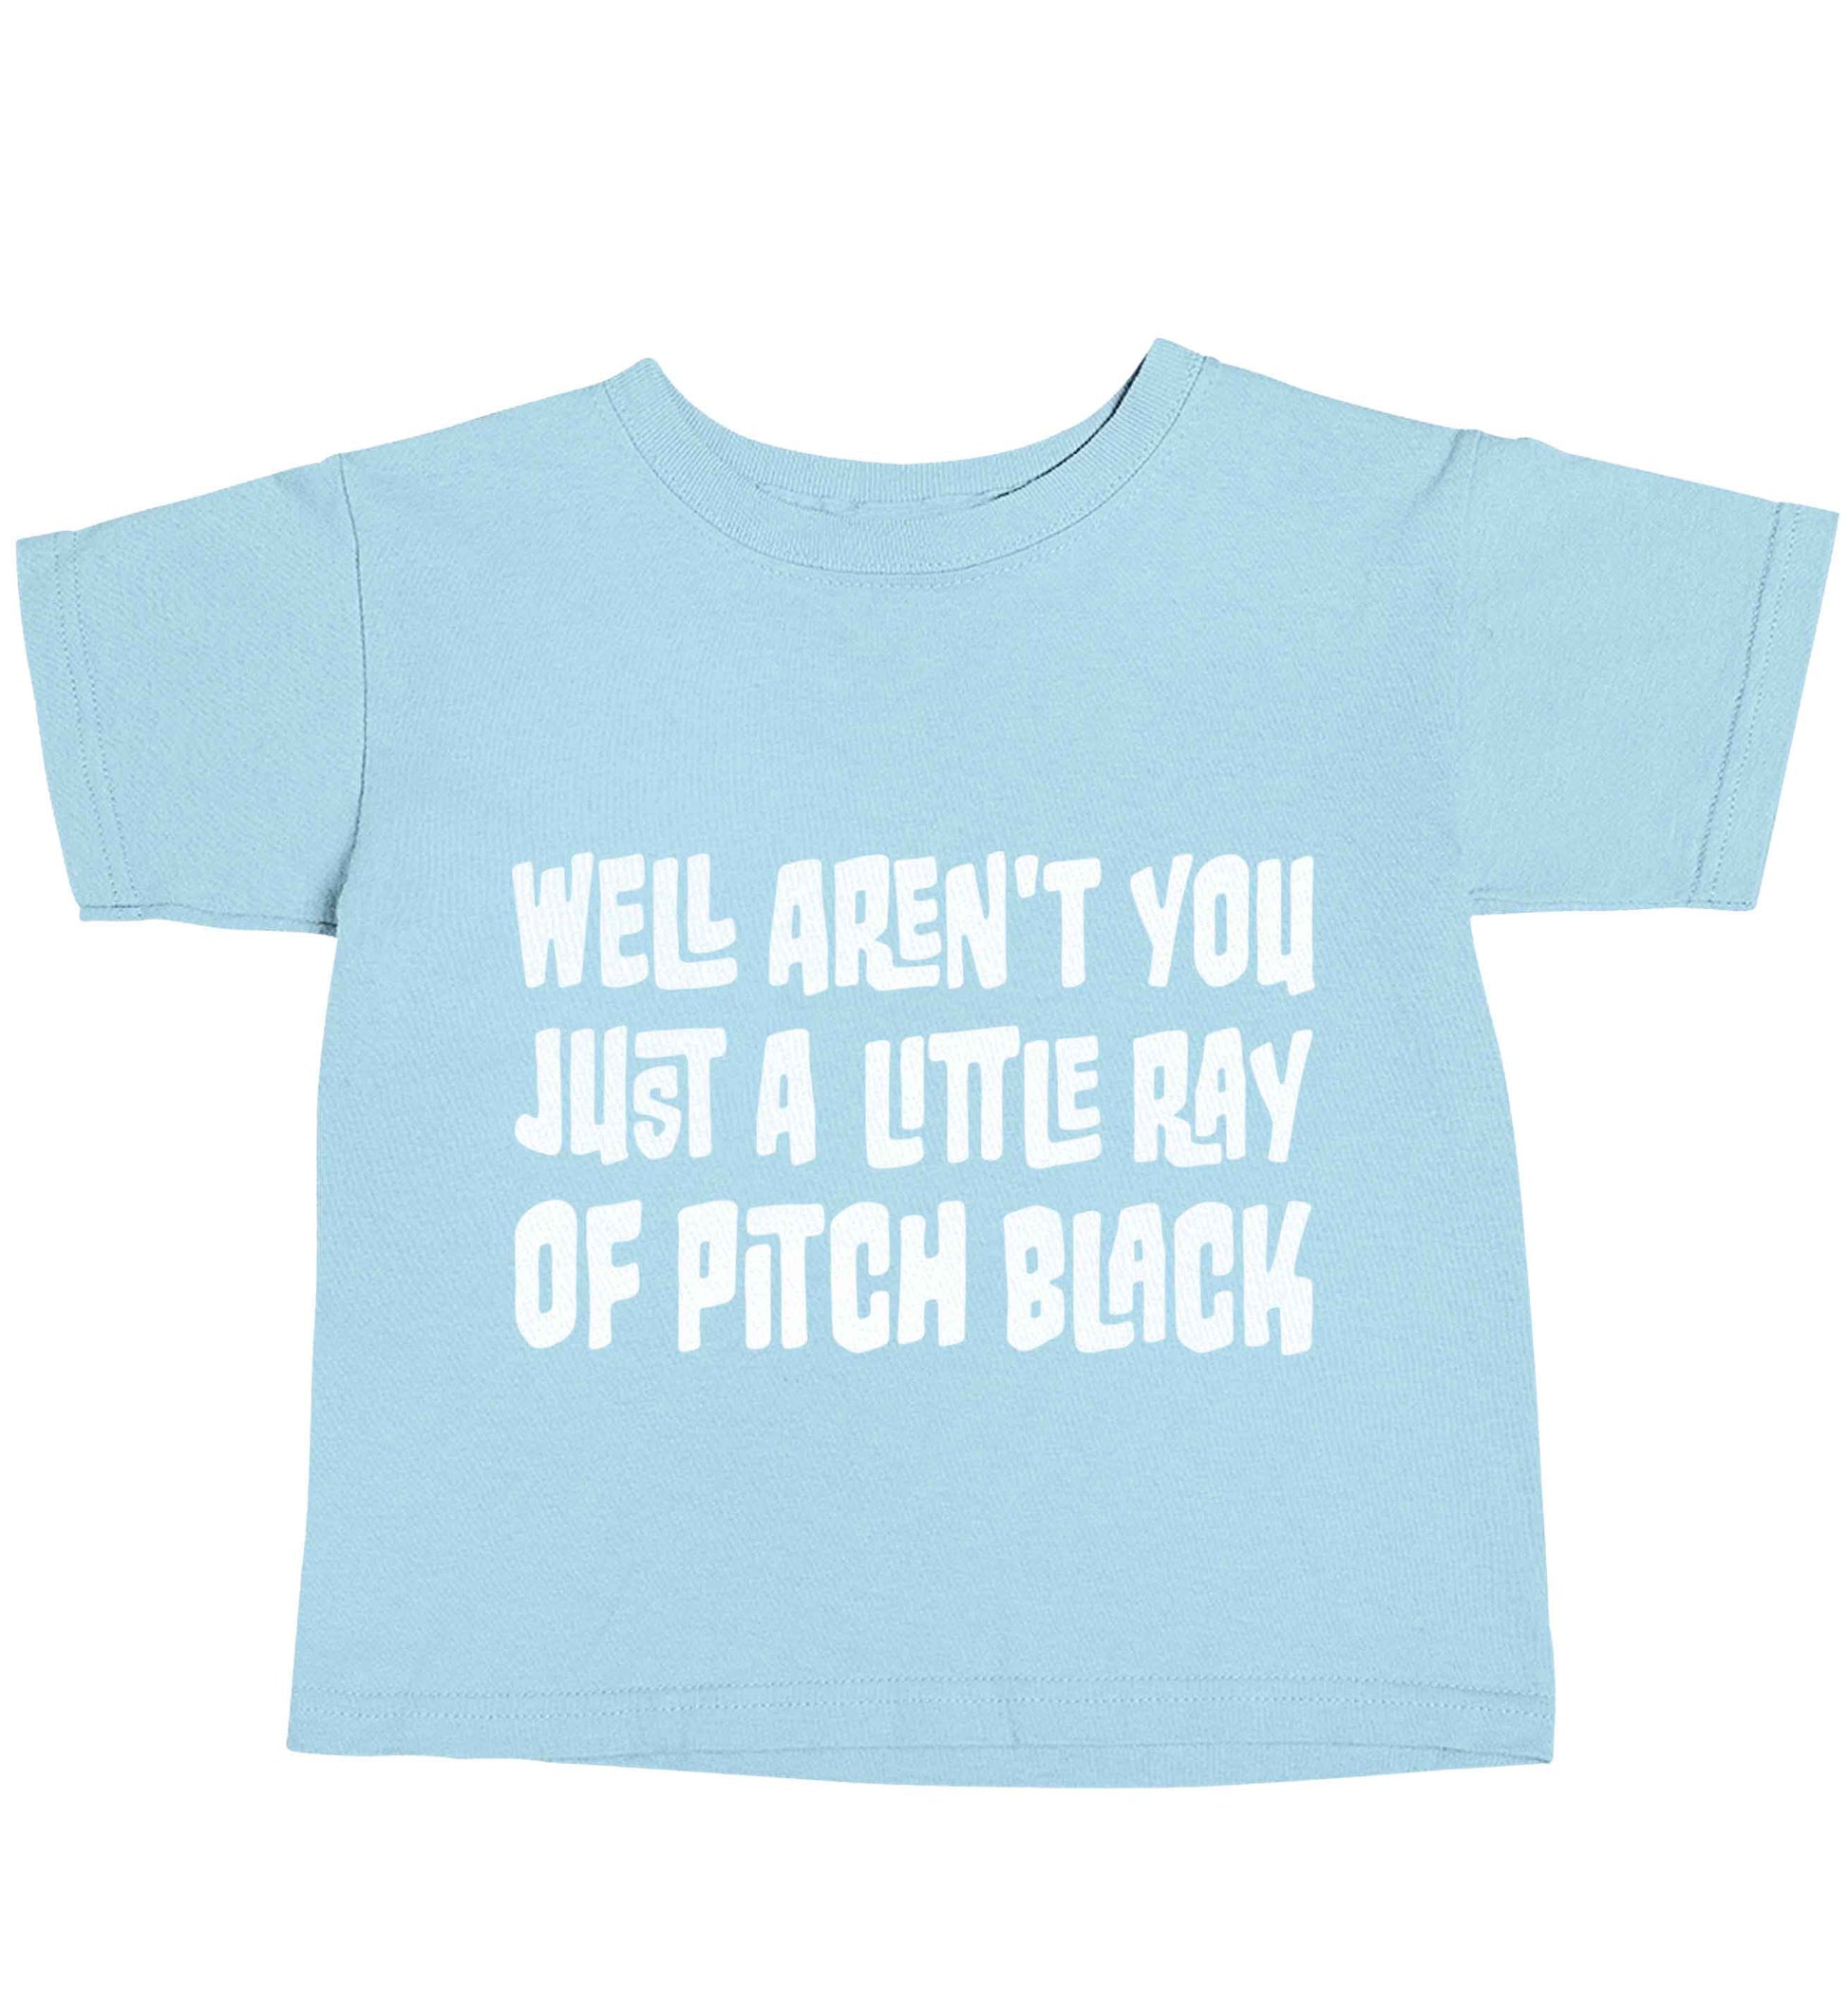 Well aren't you just a little ray of pitch black Kit light blue baby toddler Tshirt 2 Years